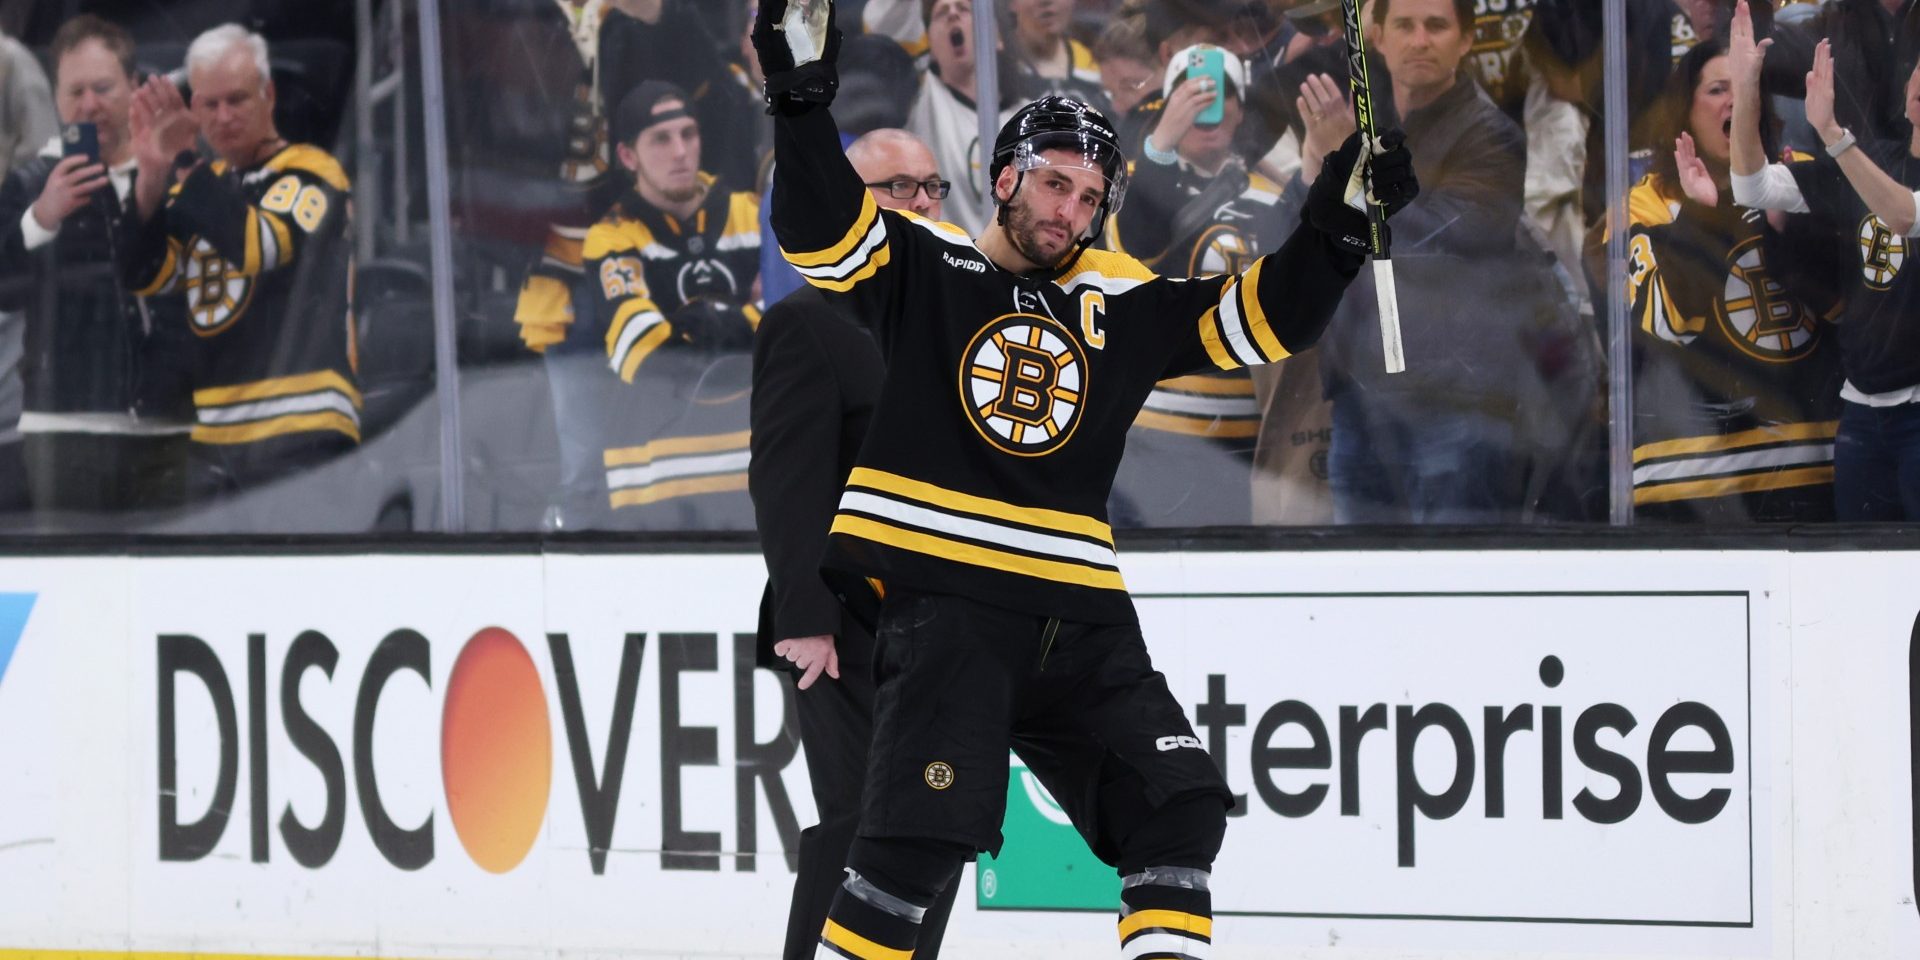 Patrice Bergeron retirement: NHL world reacts to Bruins captain calling it a career after 19 years